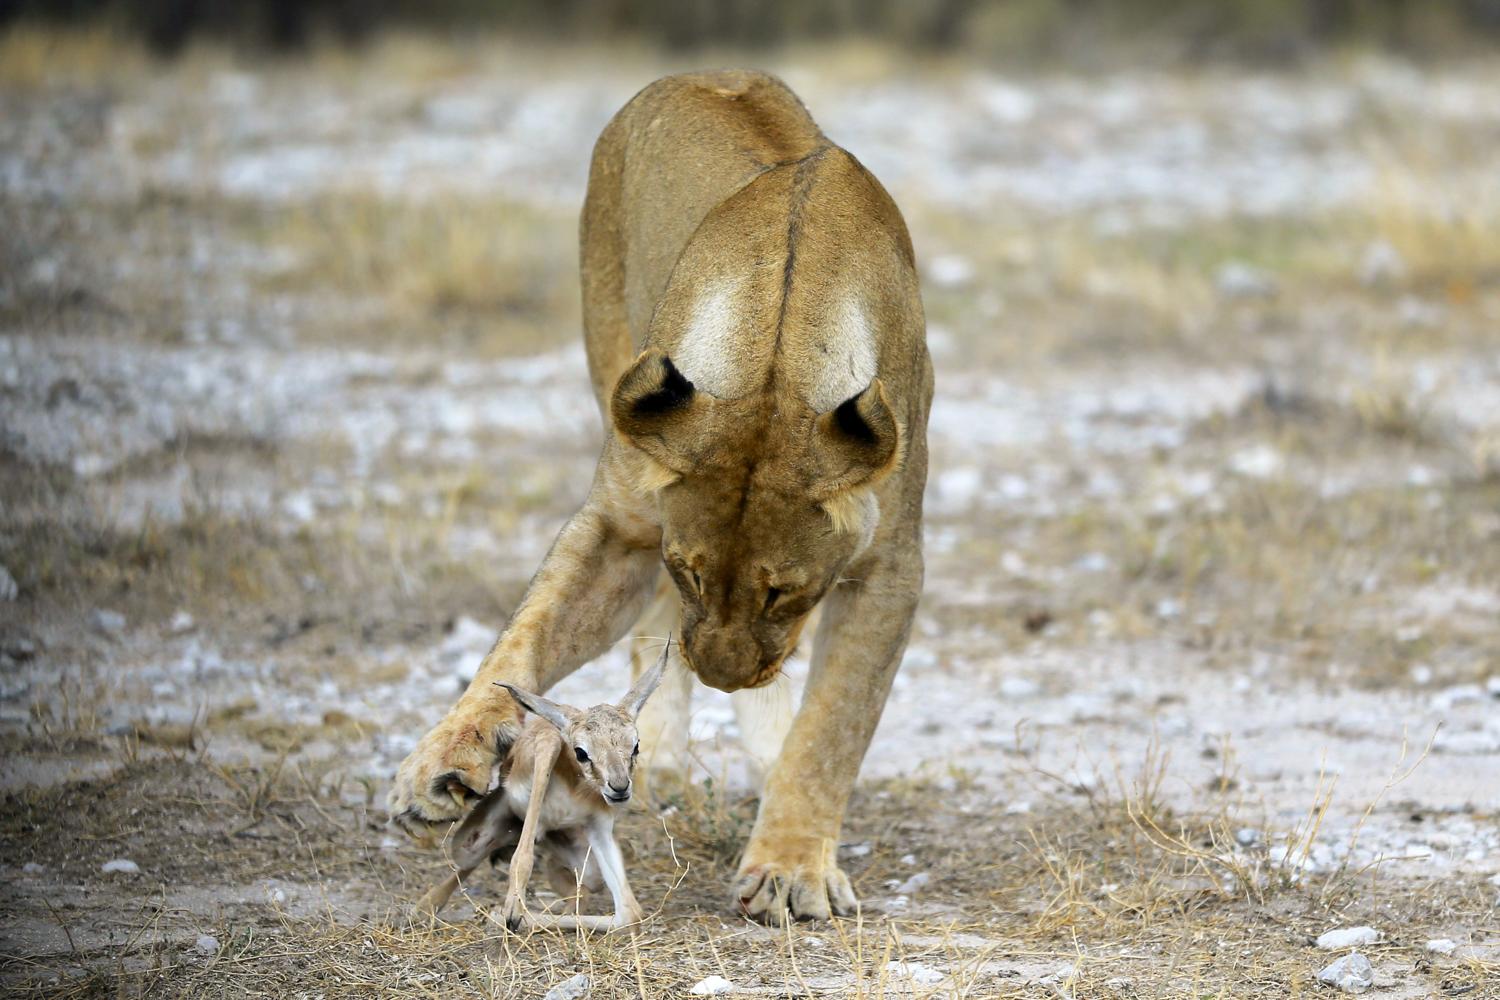 do female lions adopt cubs from any other lionesses and other prides